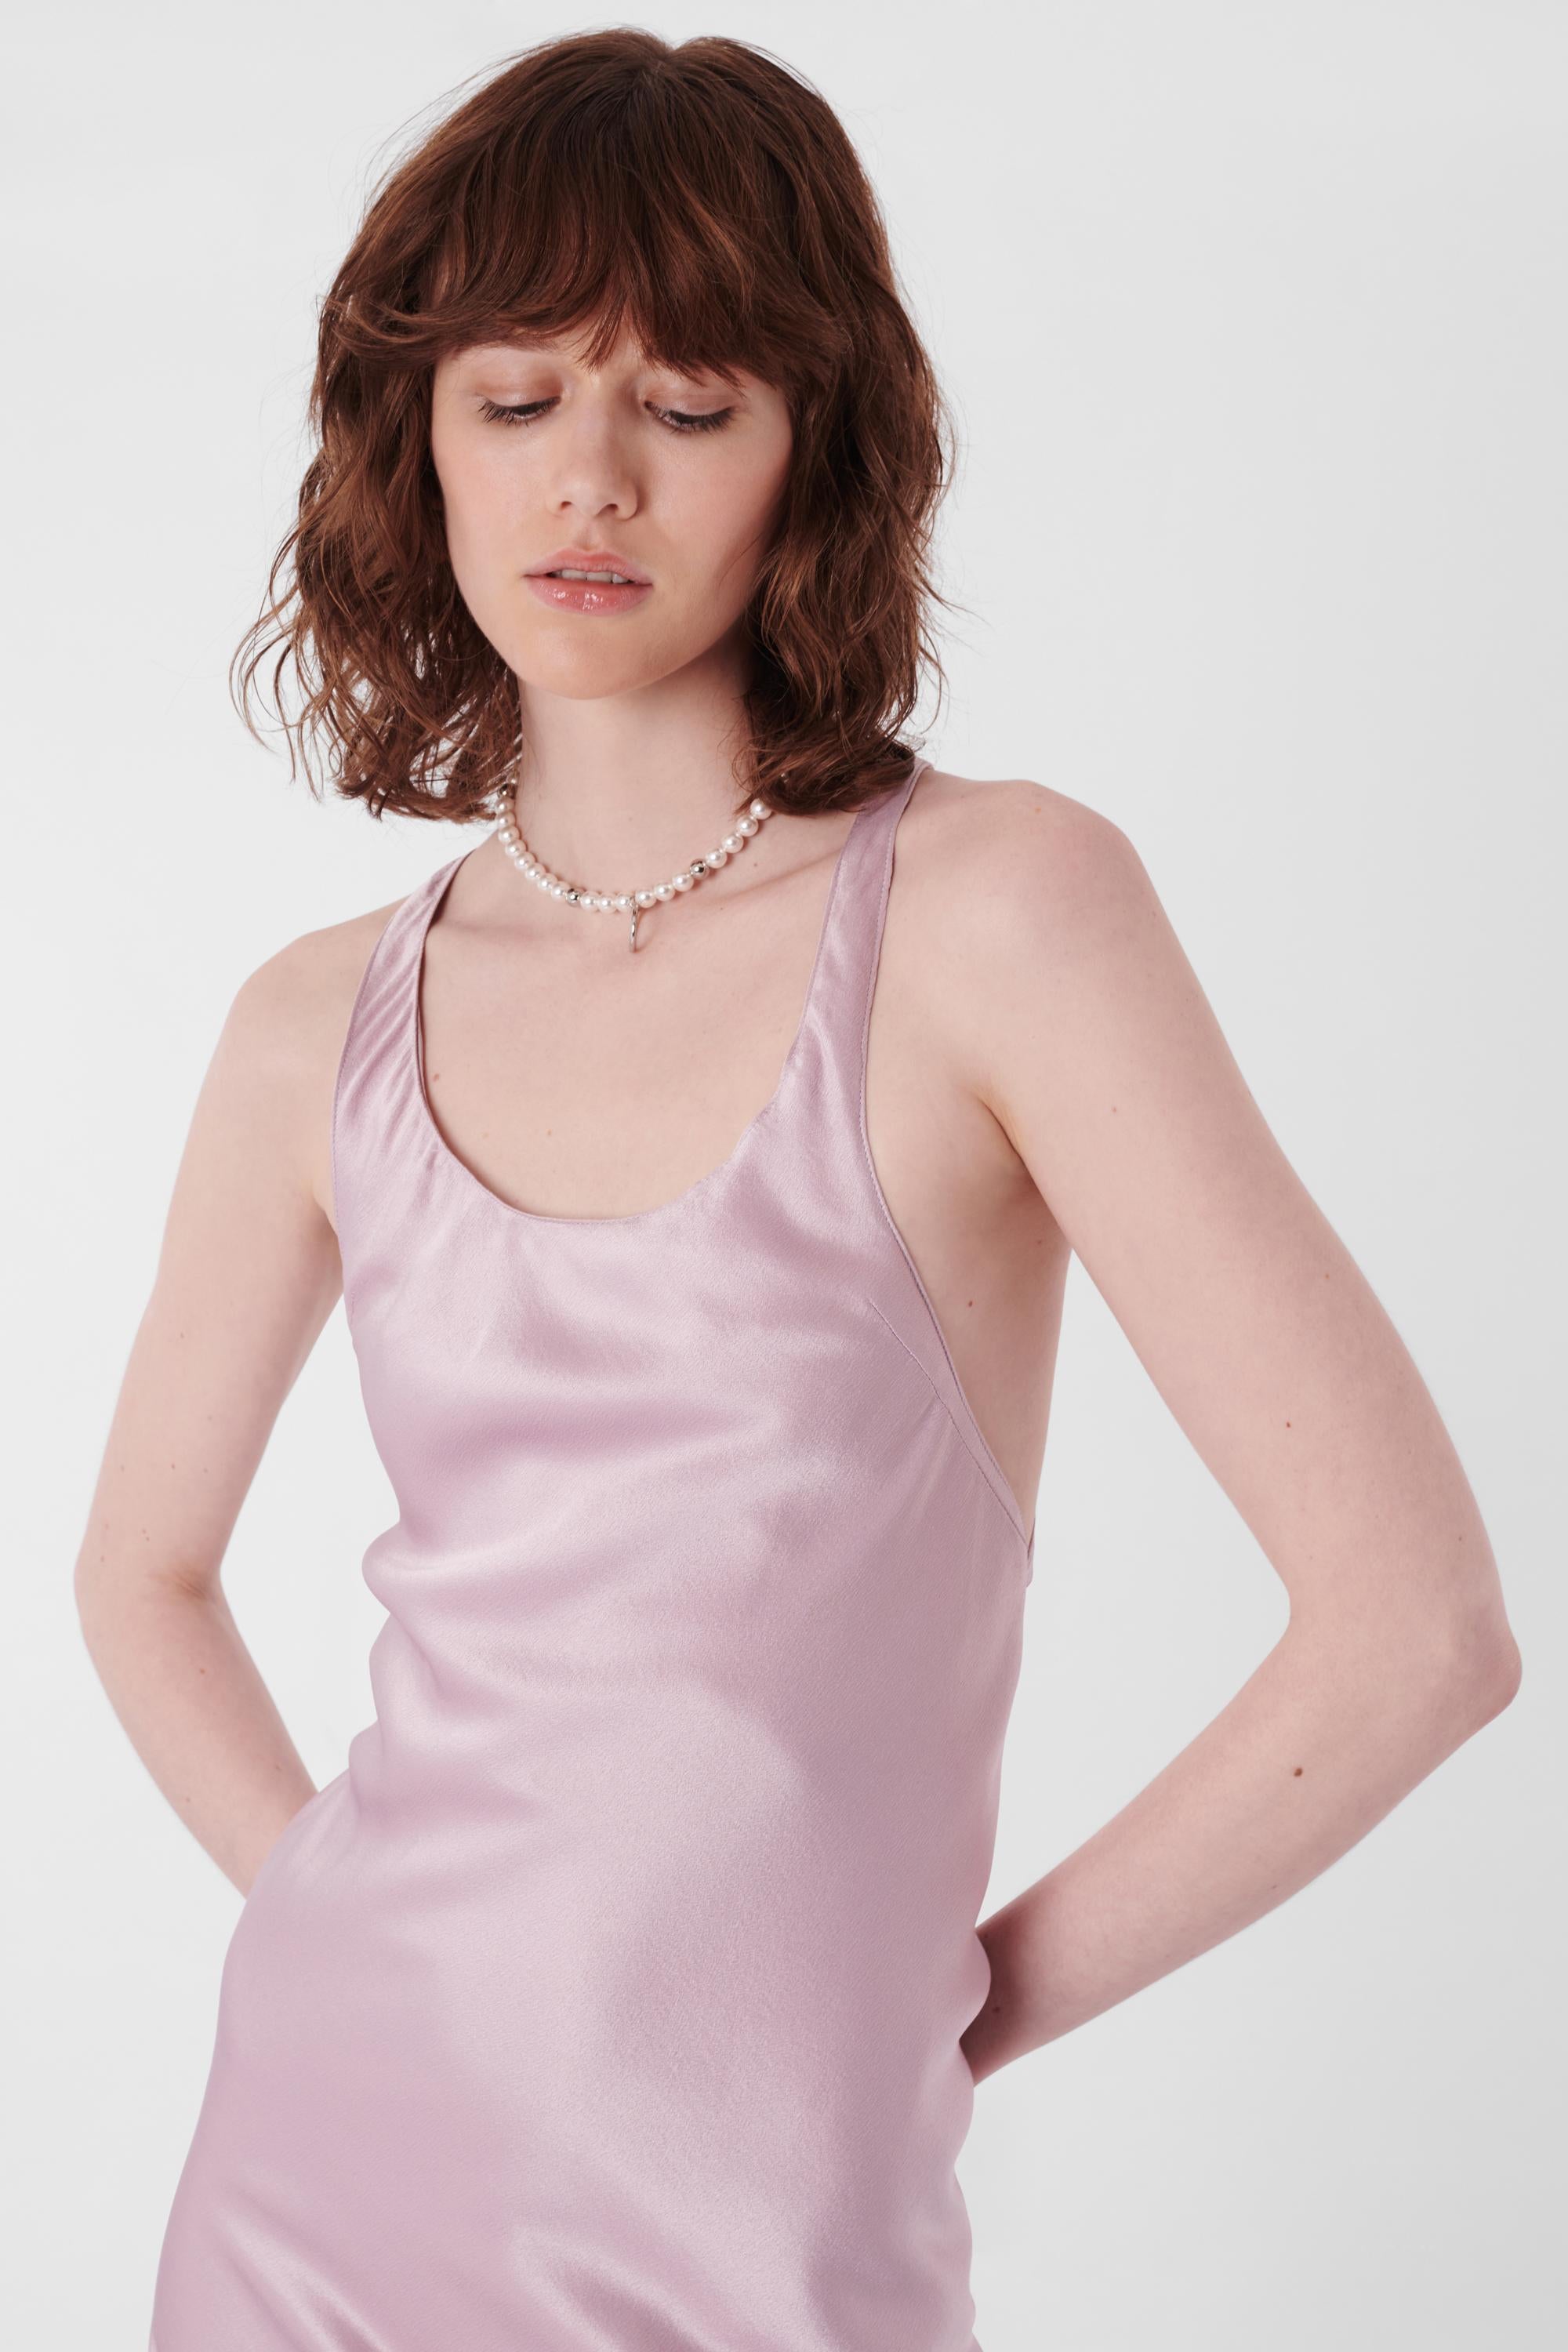 We are excited to present this Alexander Mcqueen S/S 2004 Lilac Silk Midi Dress. Features bias cut body, open cross back neckline and mermaid hem. In excellent vintage condition.

Label size: N/A
Modern size: UK: 6 to 8, US: 0 to 4, EU: 34 to